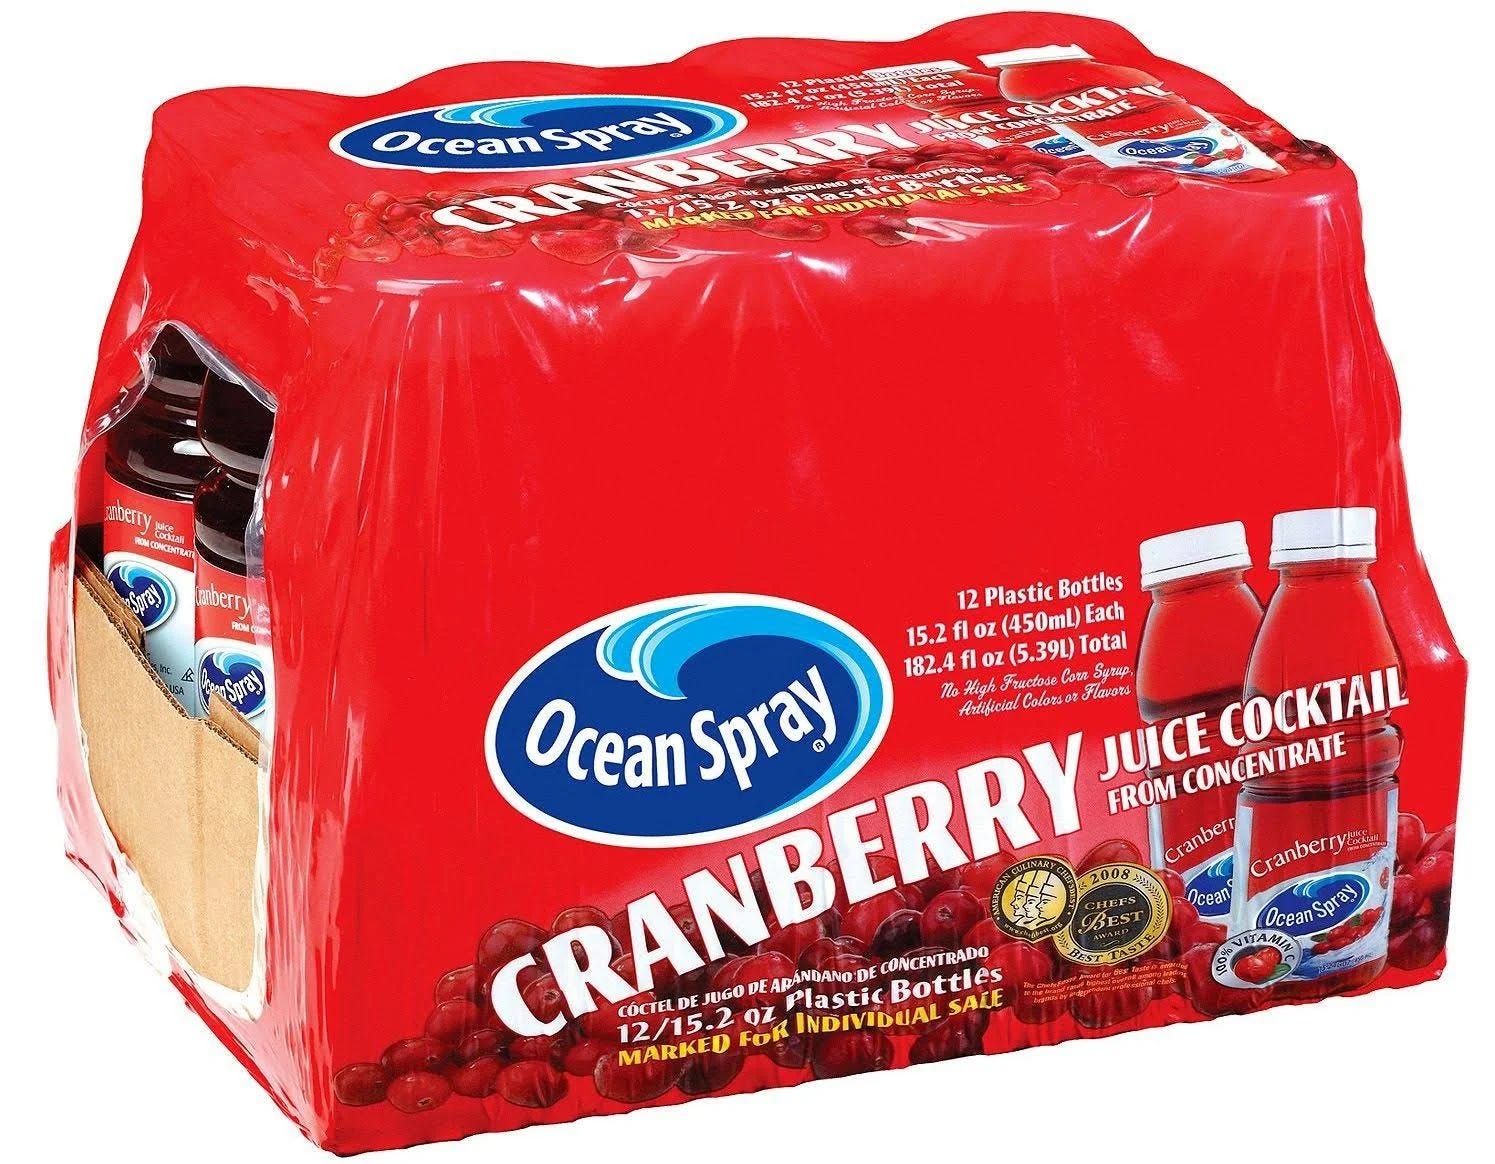 Ocean Spray 12-Pack White Cranberry Juice - No Artificial Flavors, Preservatives | Image